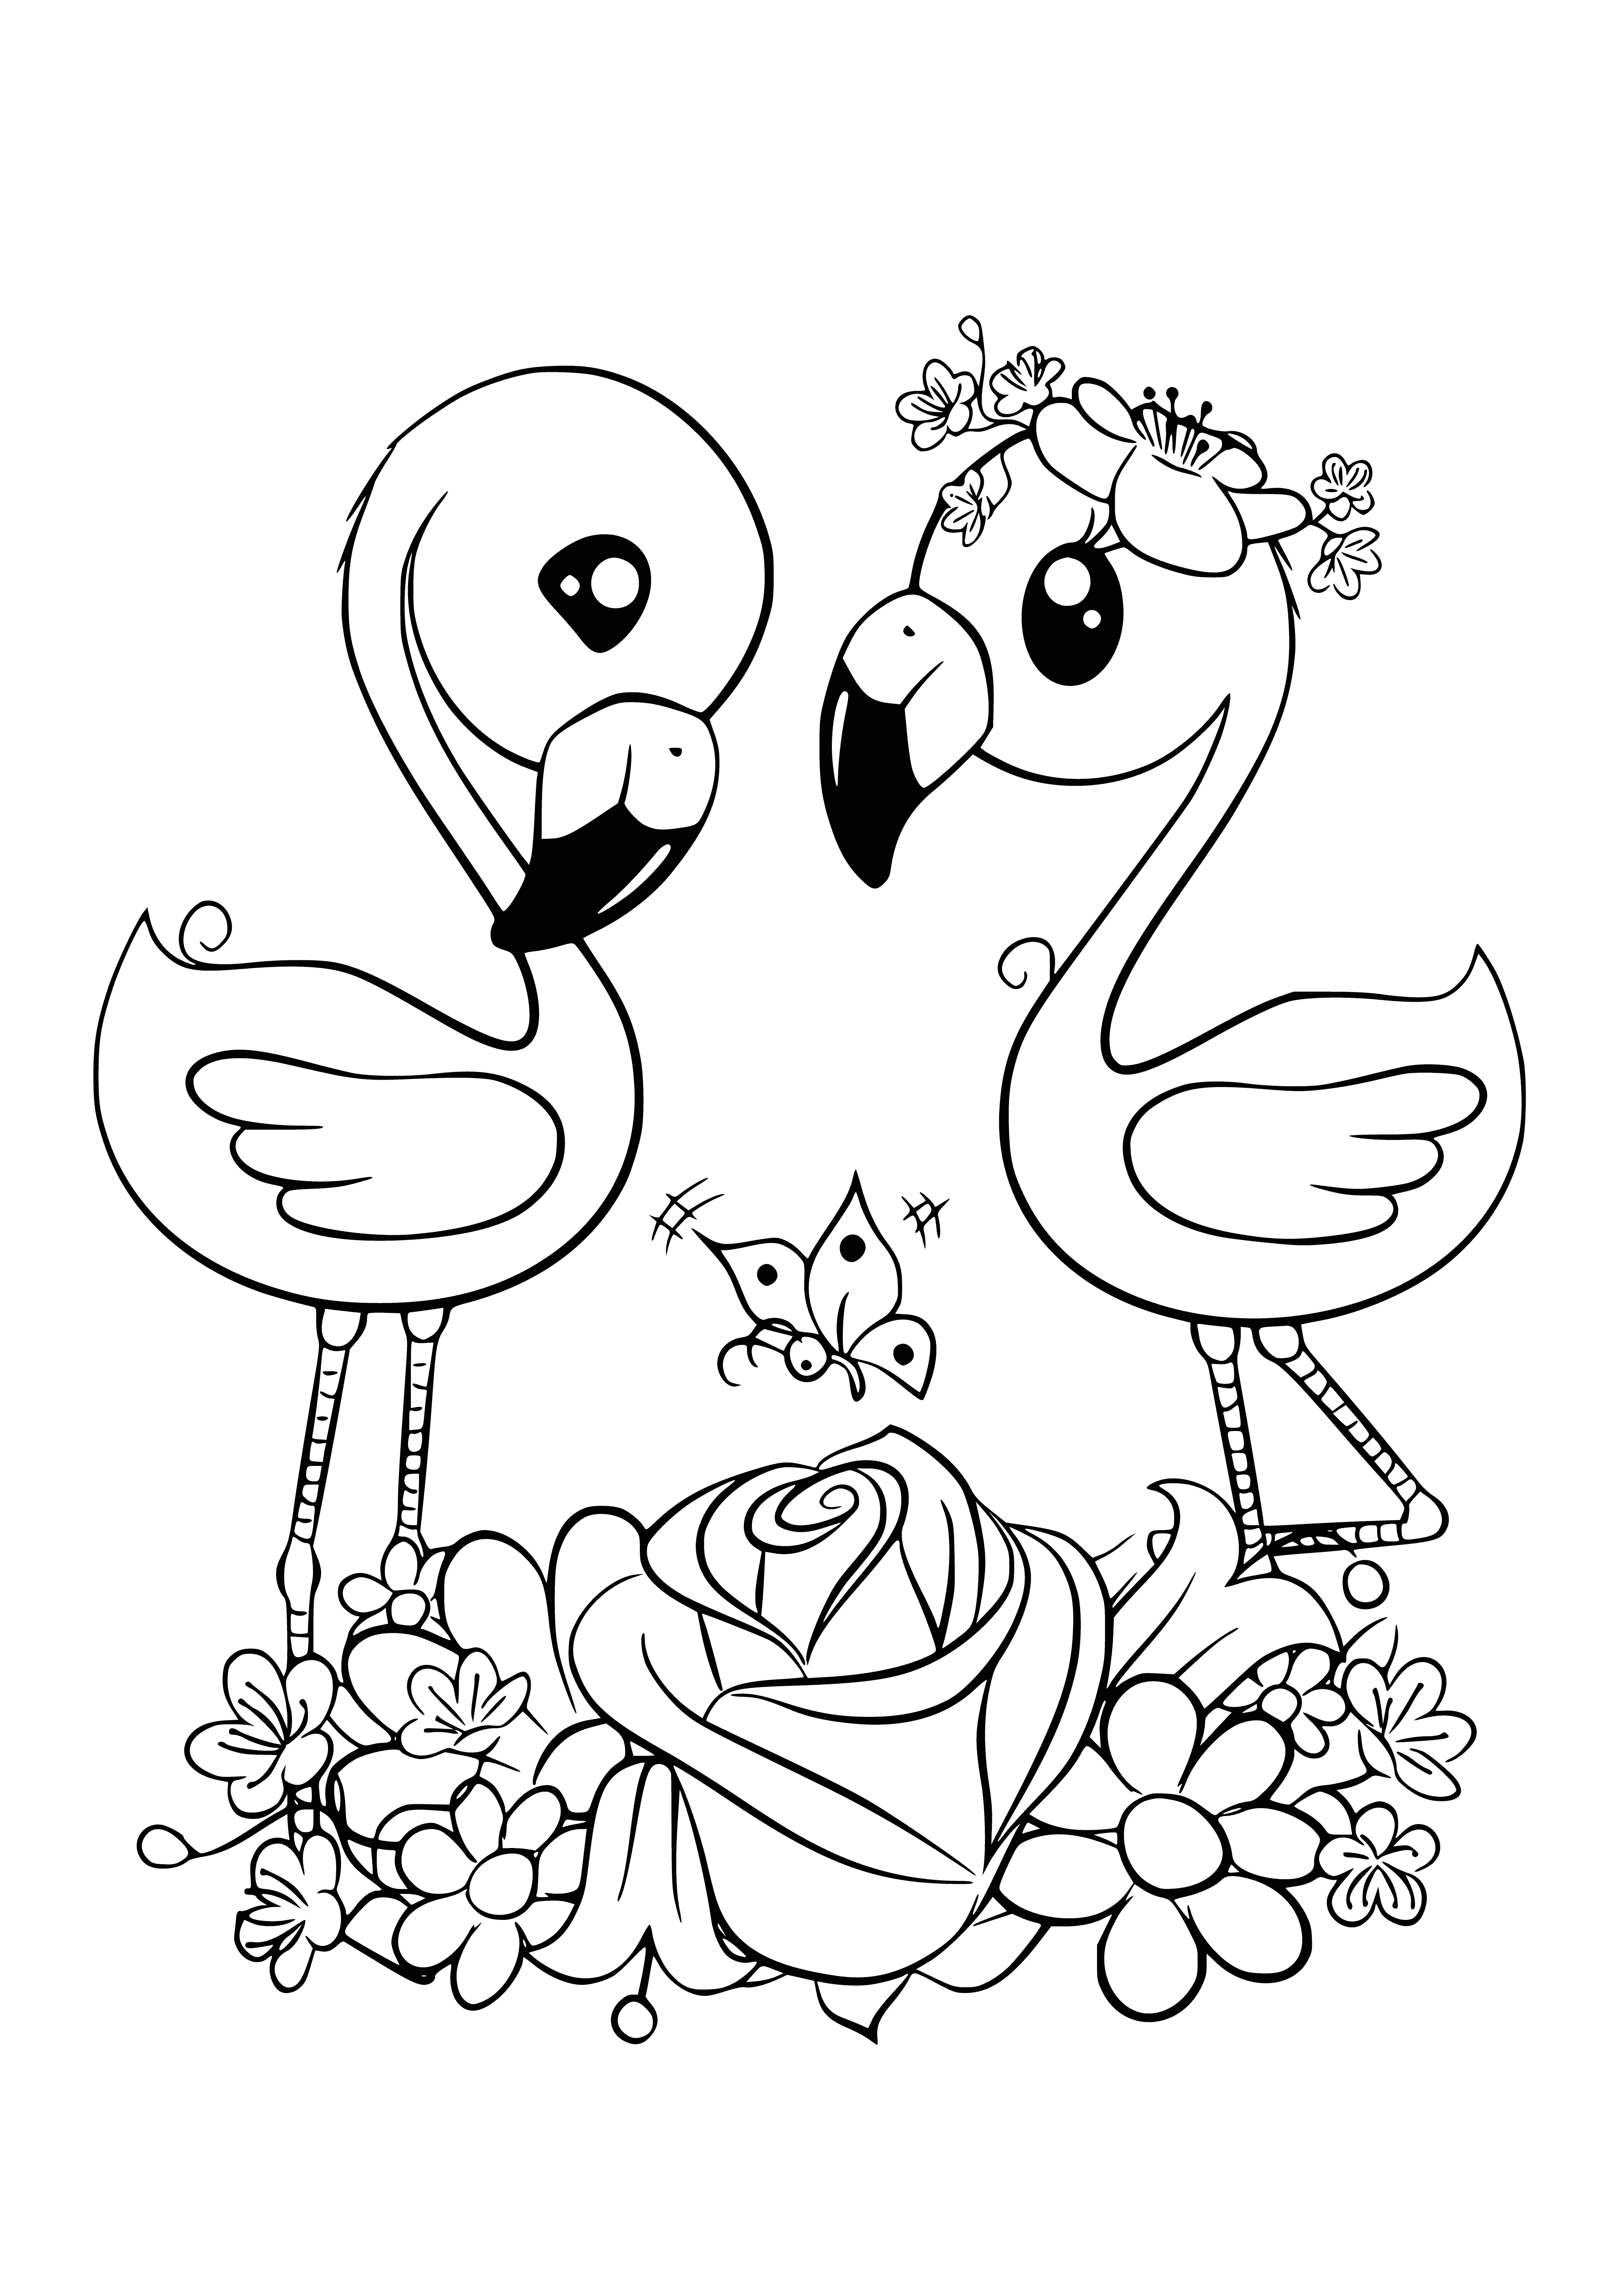 coloring page: Cute coloring page w/ flamingo in center + small hearts; background is light pink. #Coloring #Flamingo #Hearts